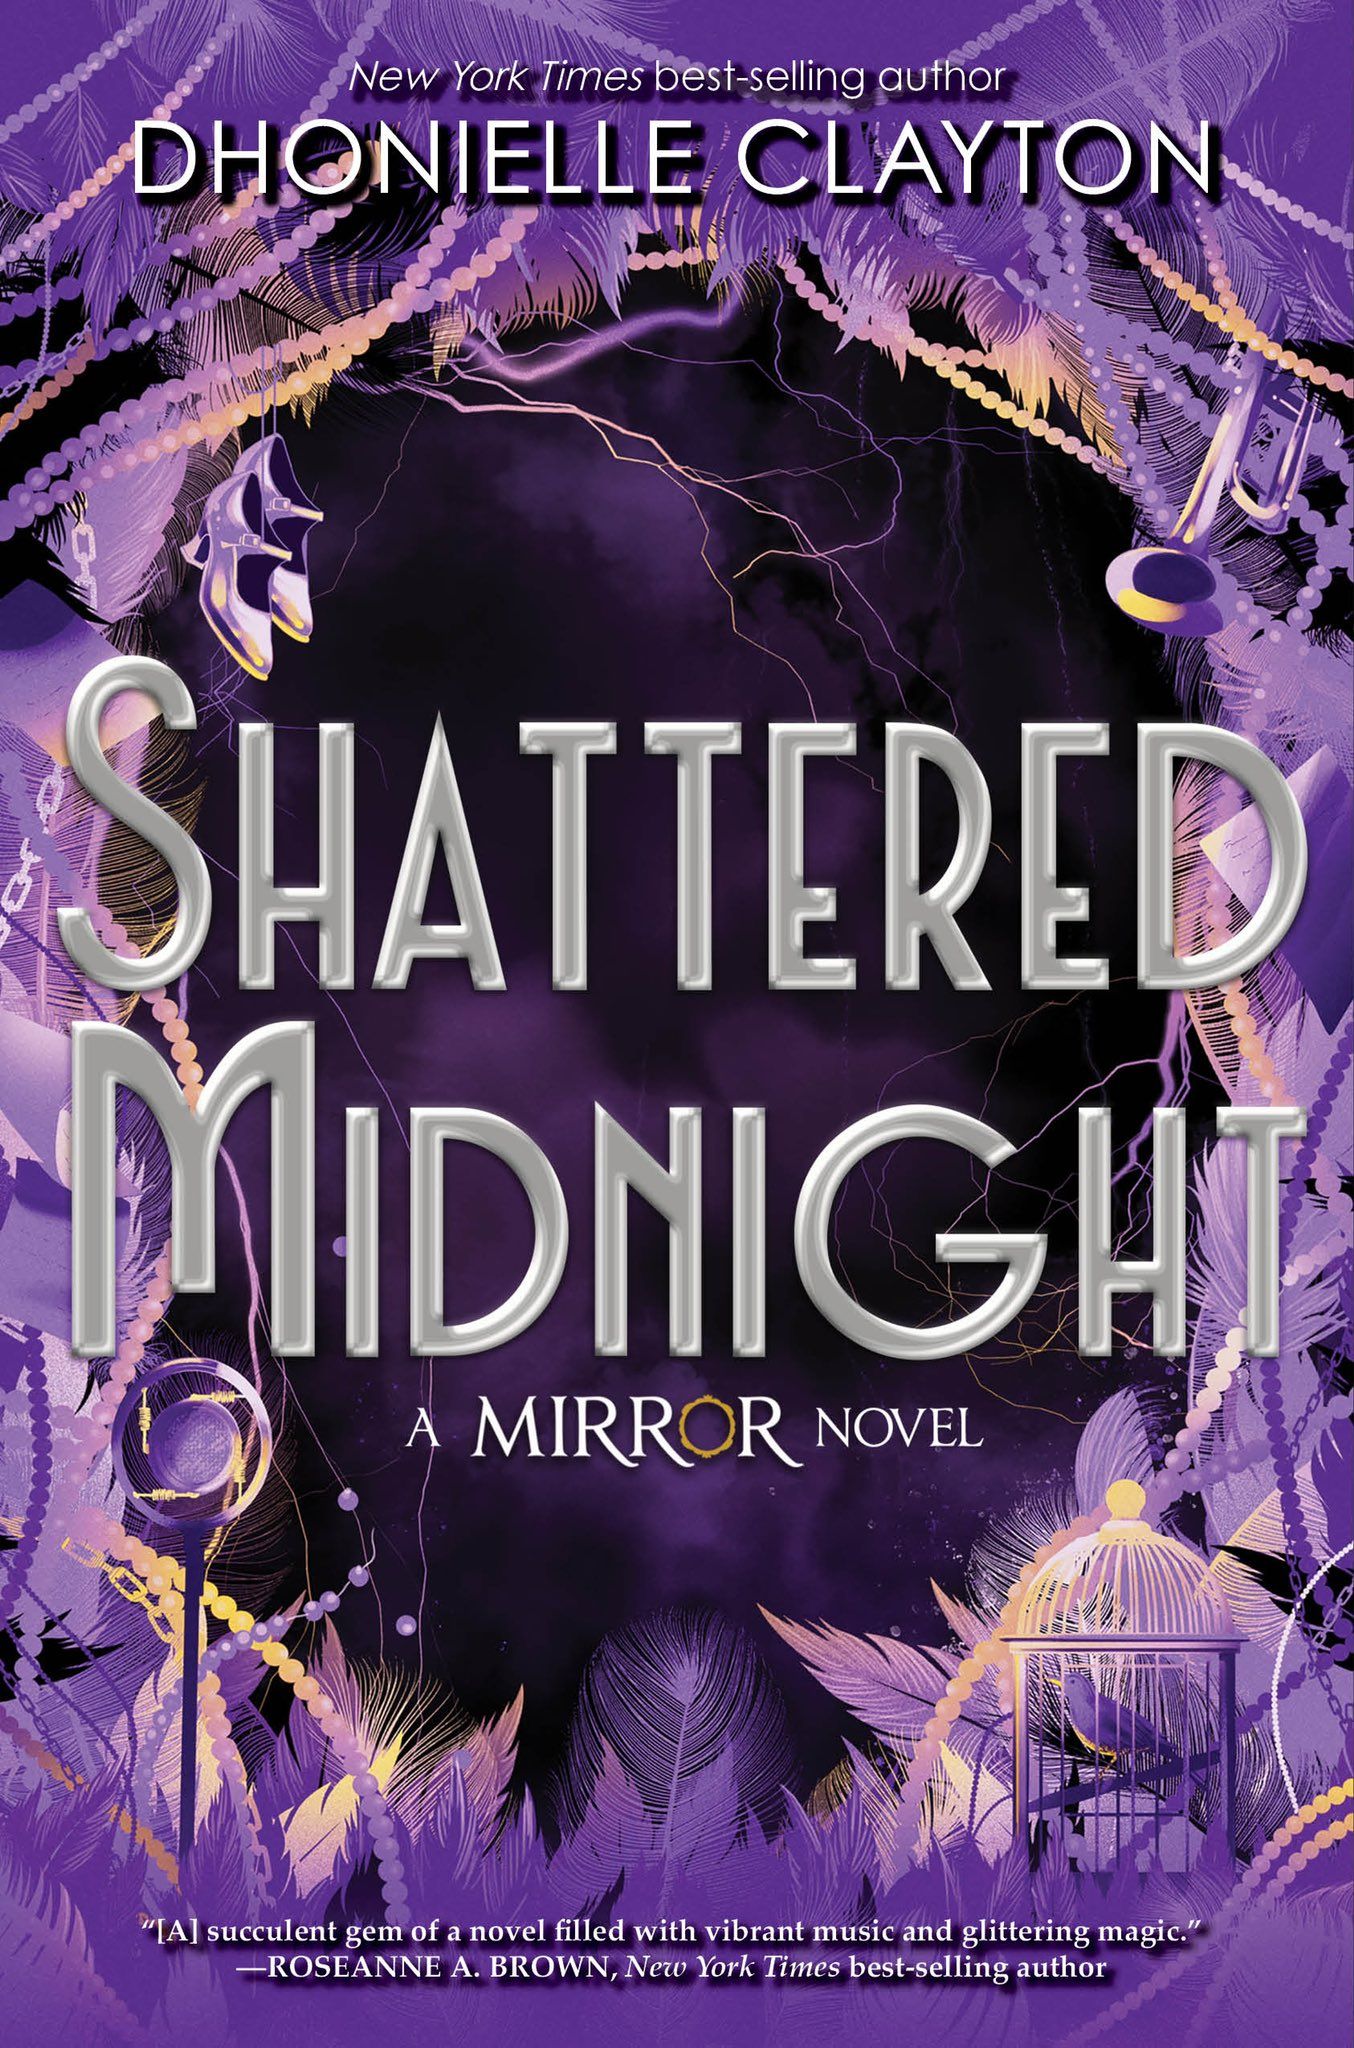 Cover of "Shattered Midnight" by Dhonielle Clayton